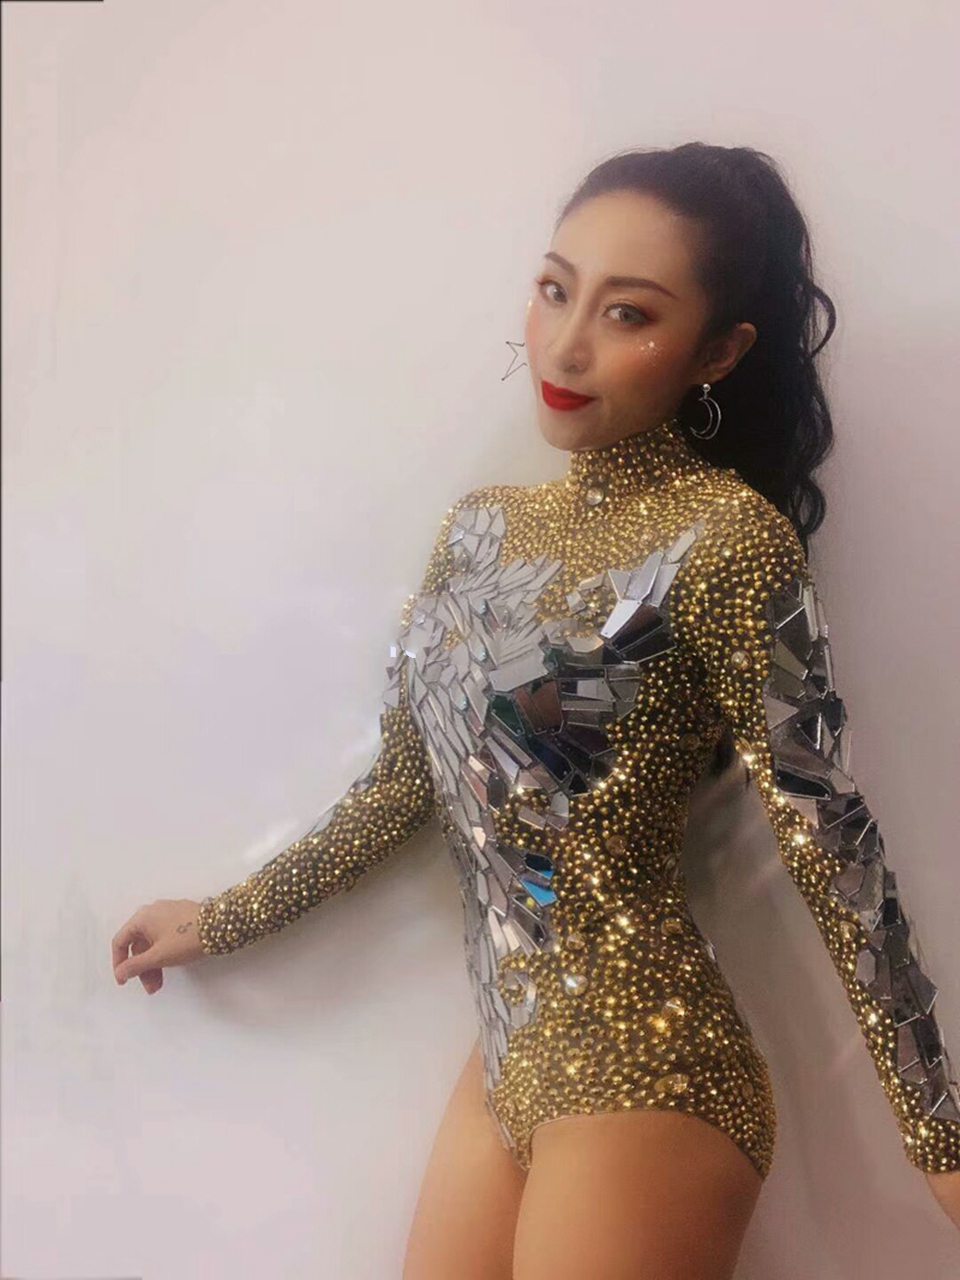 Shining Gold Rhinestones Mirrors Bodysuit Women's Birthday Celebrate Party Outfit DS Bar Singer Dancer Show Performance Costume